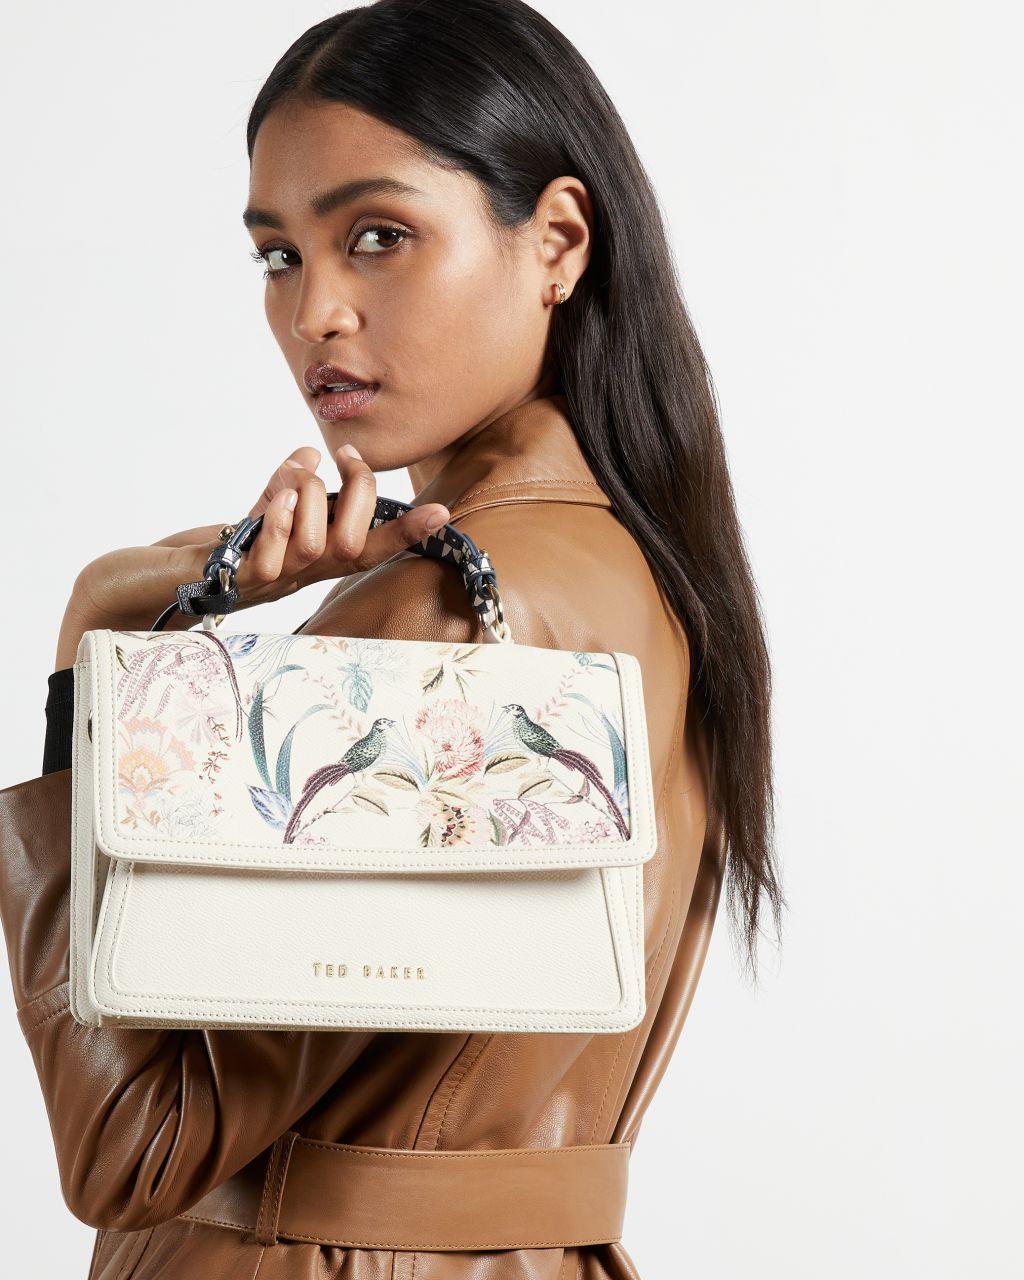 Aggregate more than 68 ted baker sylviee bag latest - esthdonghoadian